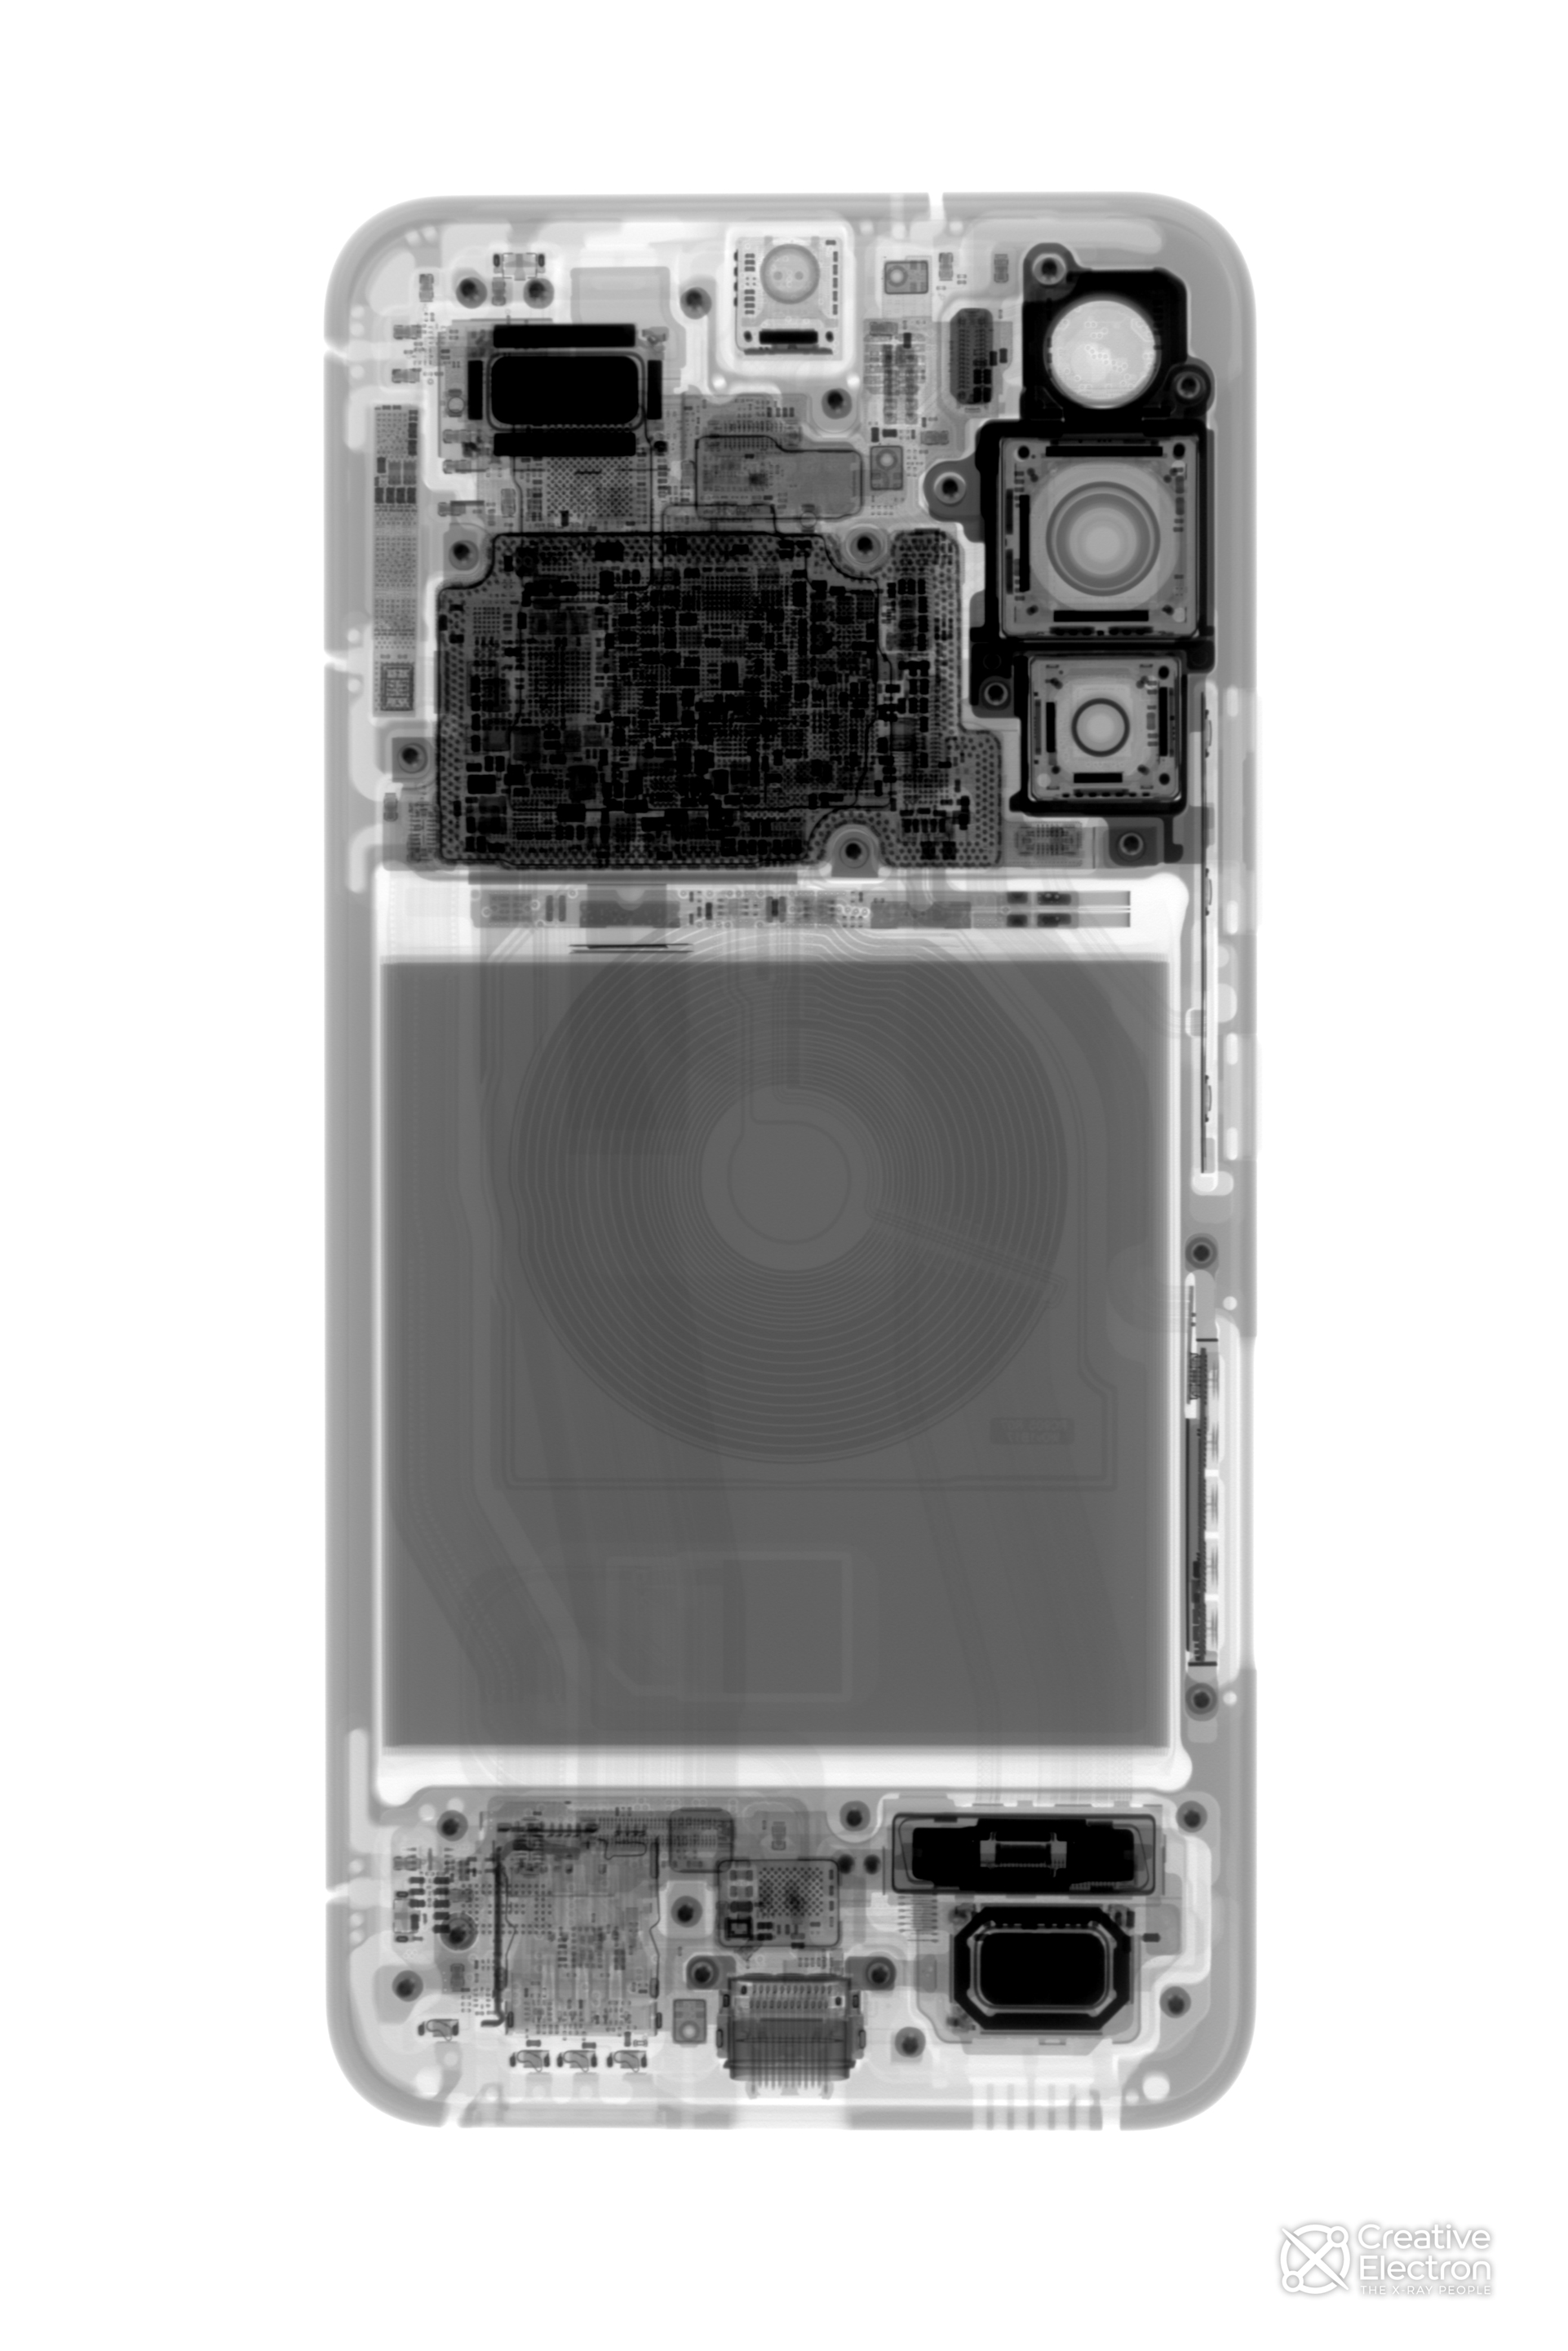 A grayscale X-ray image of the Samsung Galaxy S22.